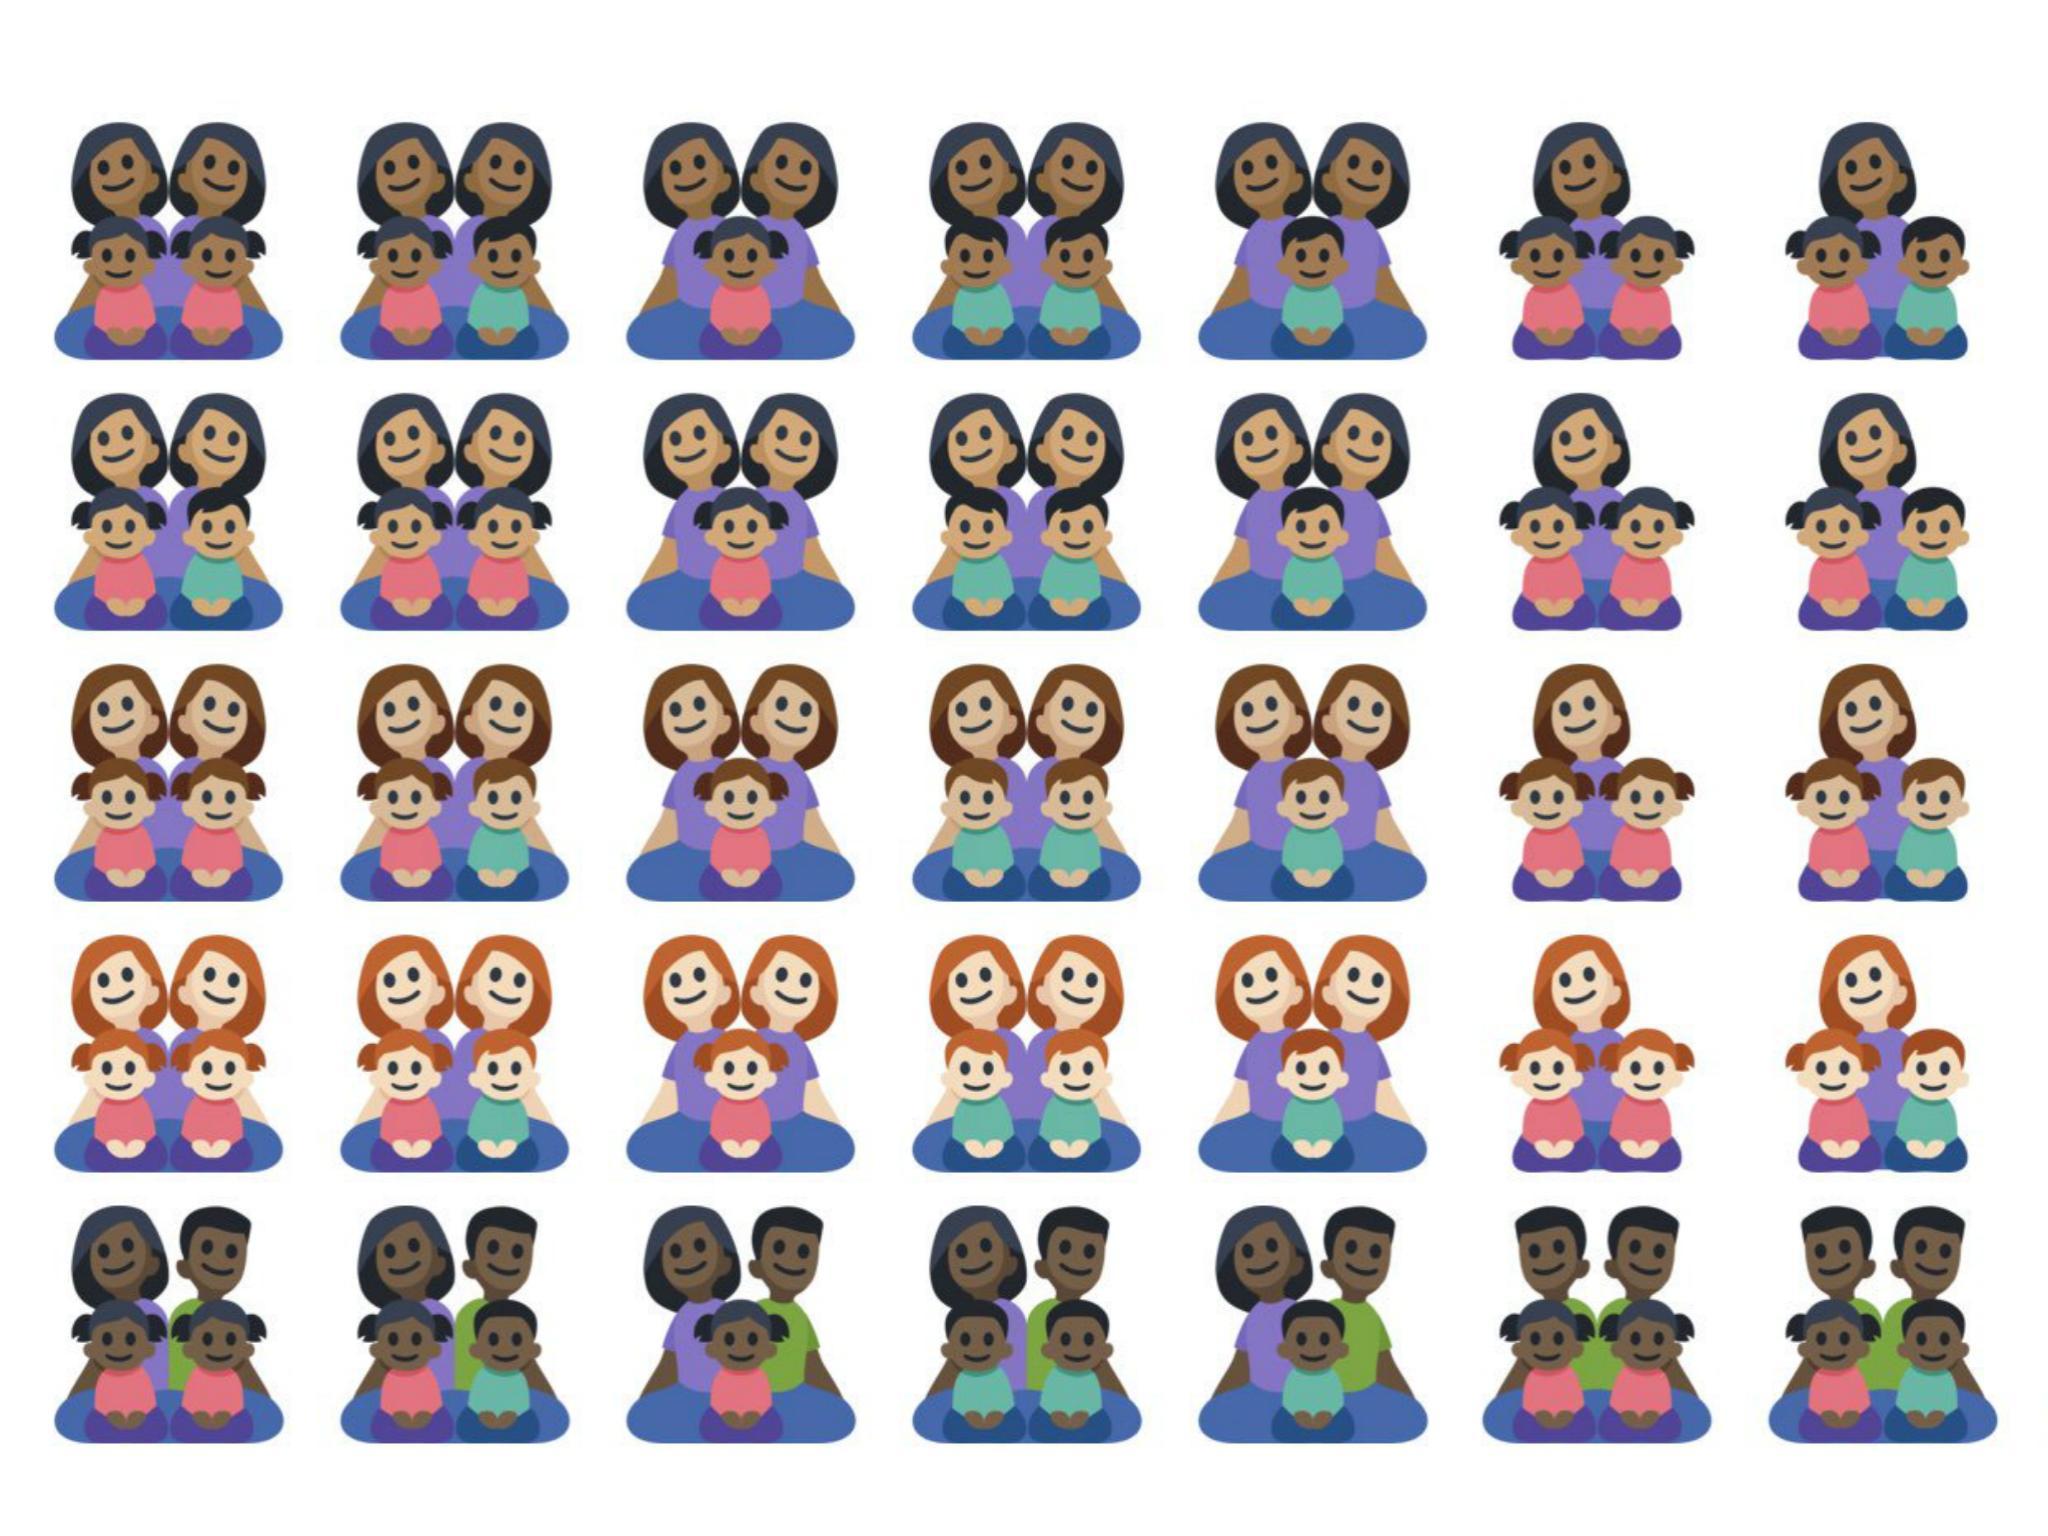 Every member of every family depicted by the new emoji shares the same skin colour